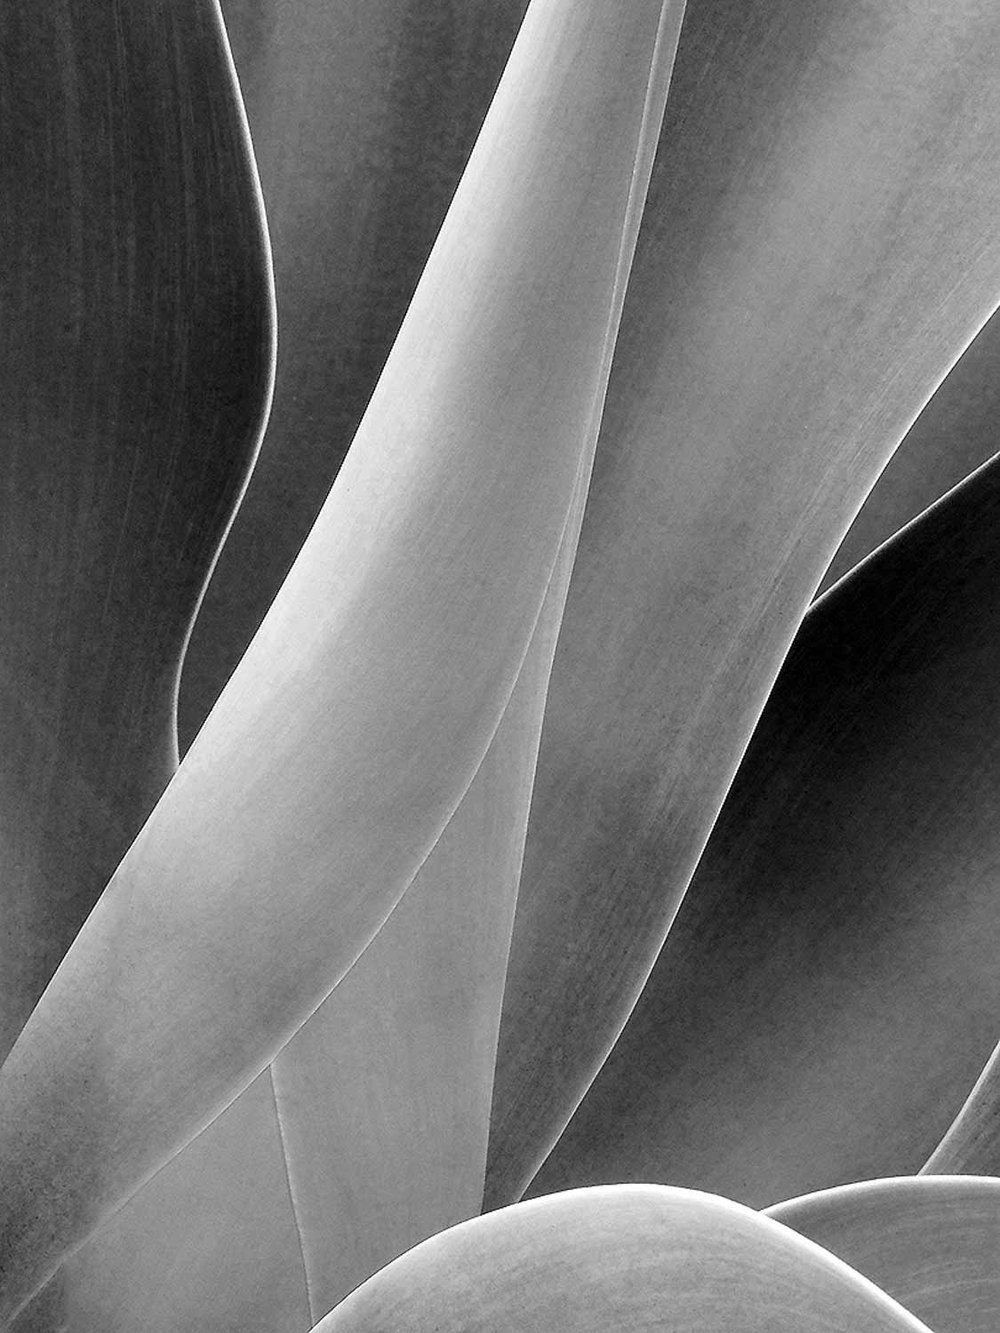 PROJECTED  -  Open: Highly Commended  - Karen Tregoning,  Agave in abstract